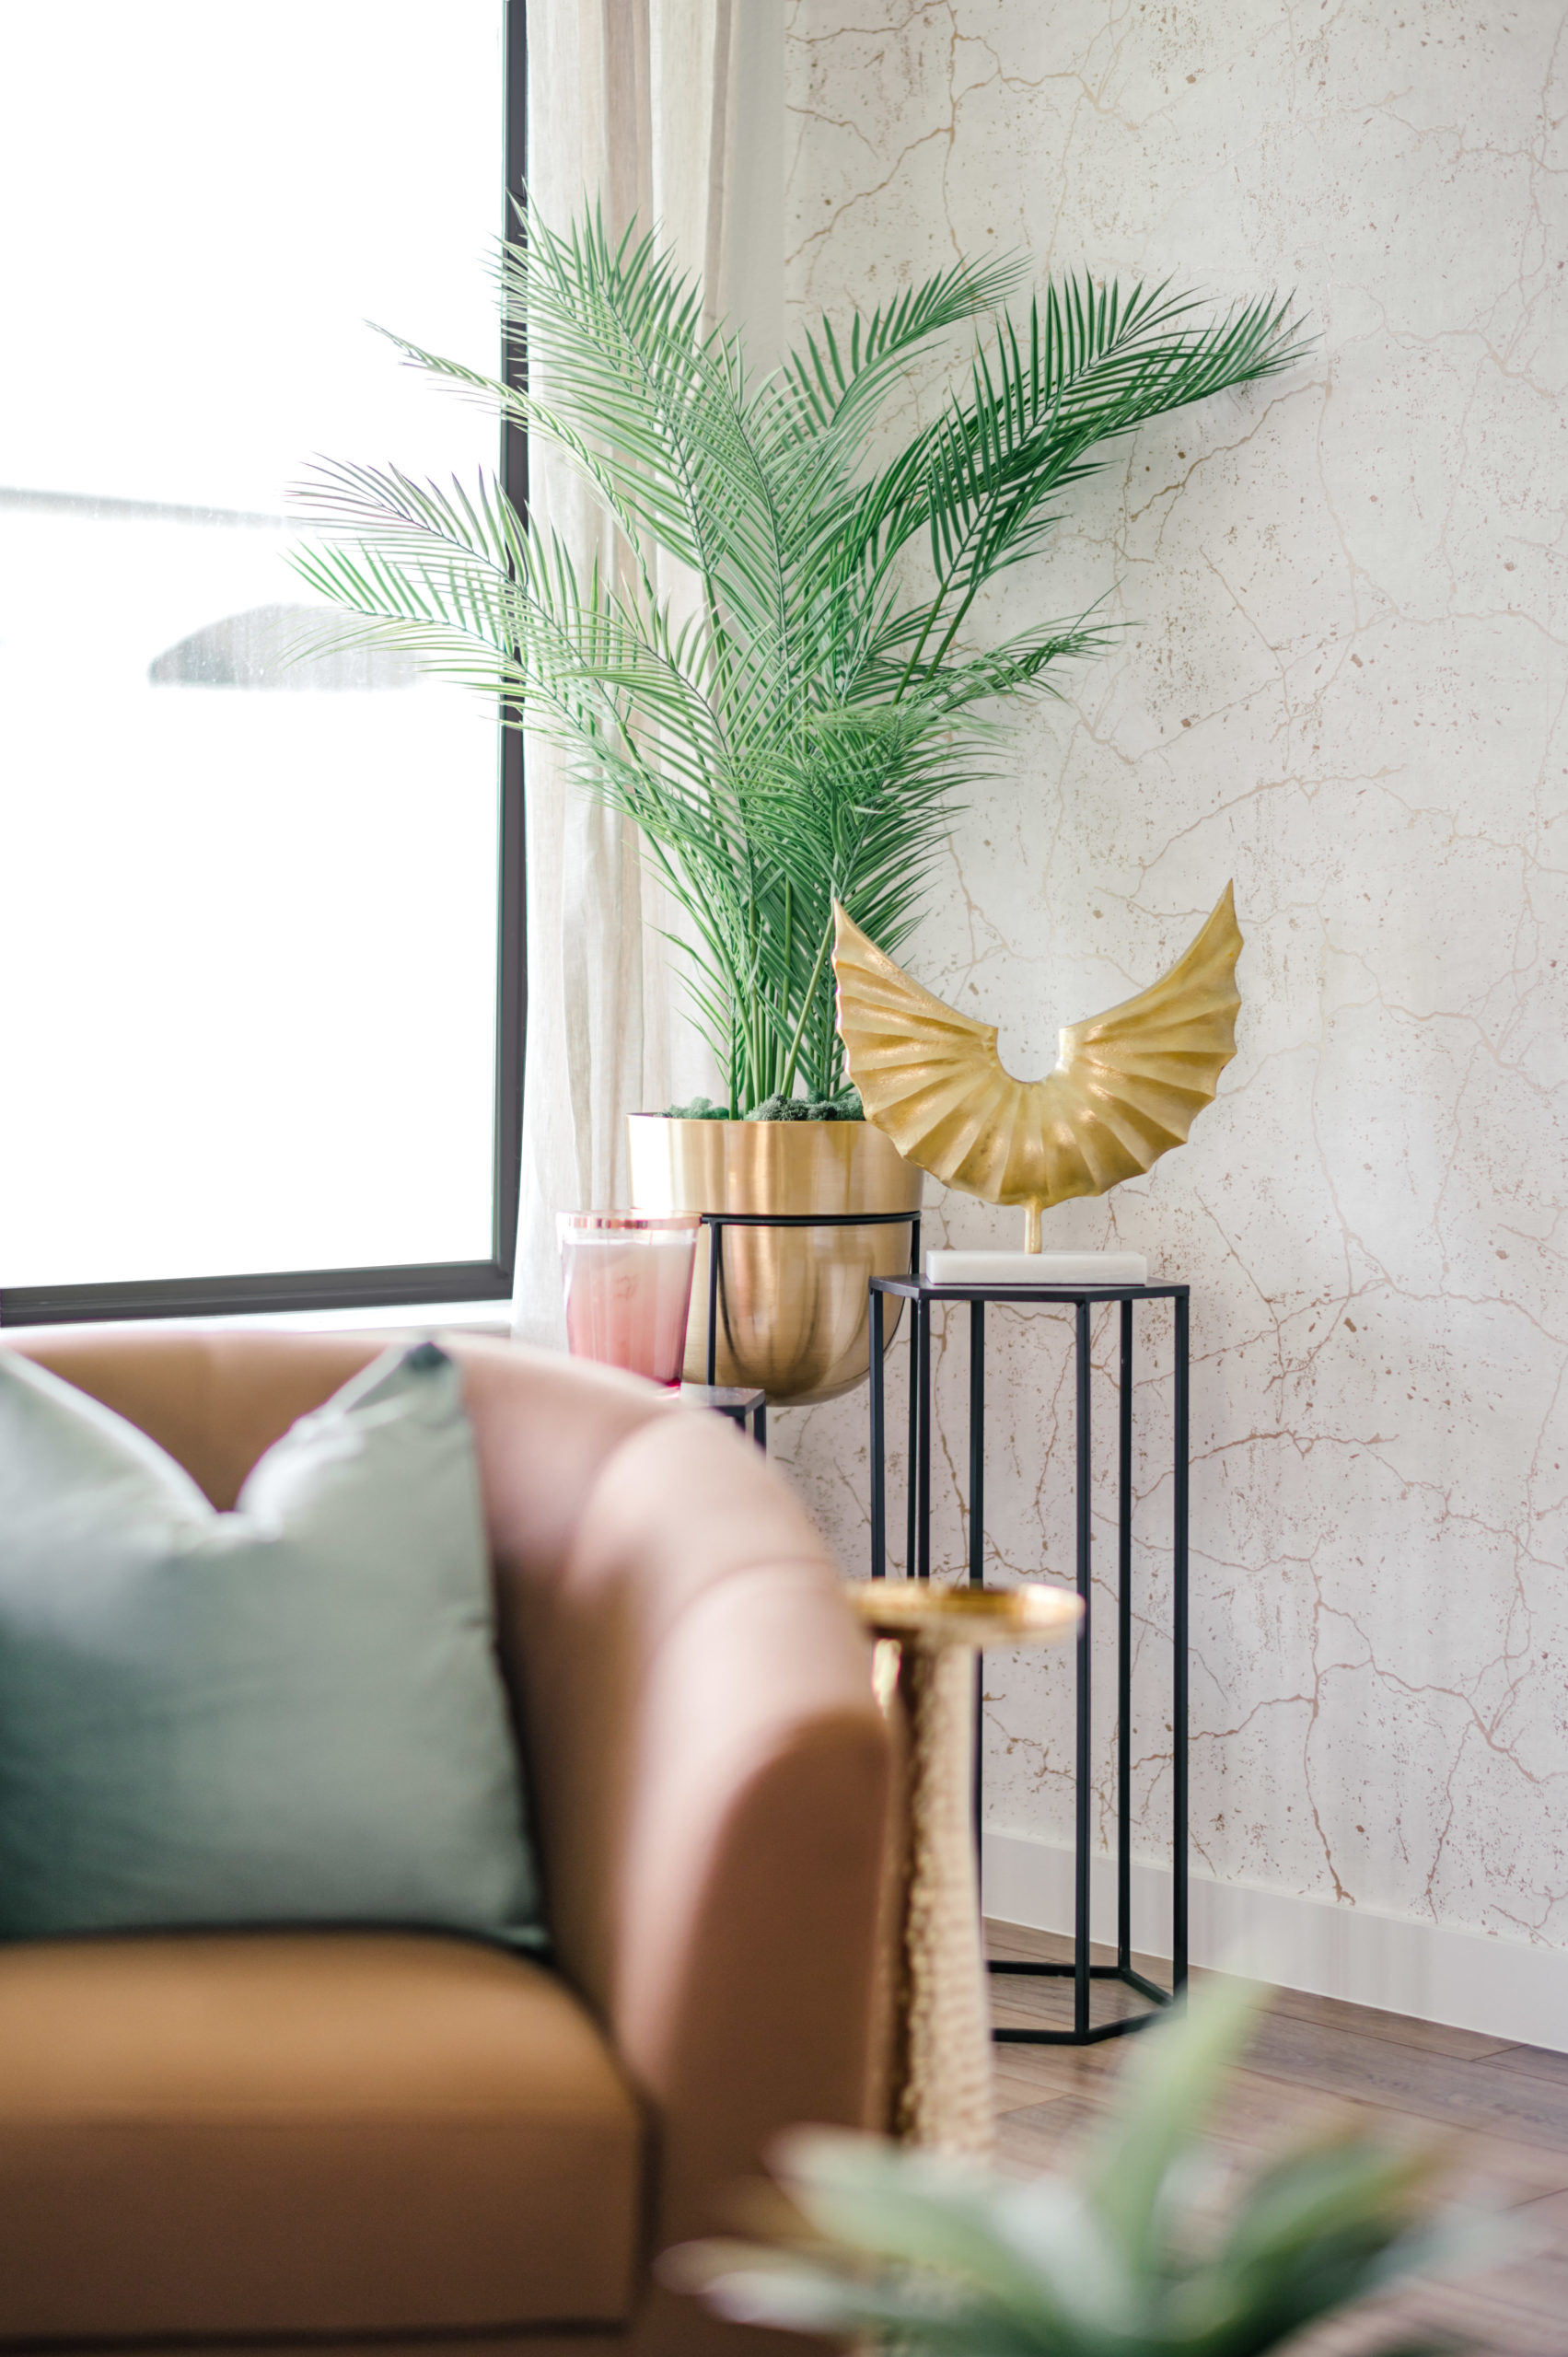 Brown leather loveseat with a light green pillow sitting next to a plant and decor